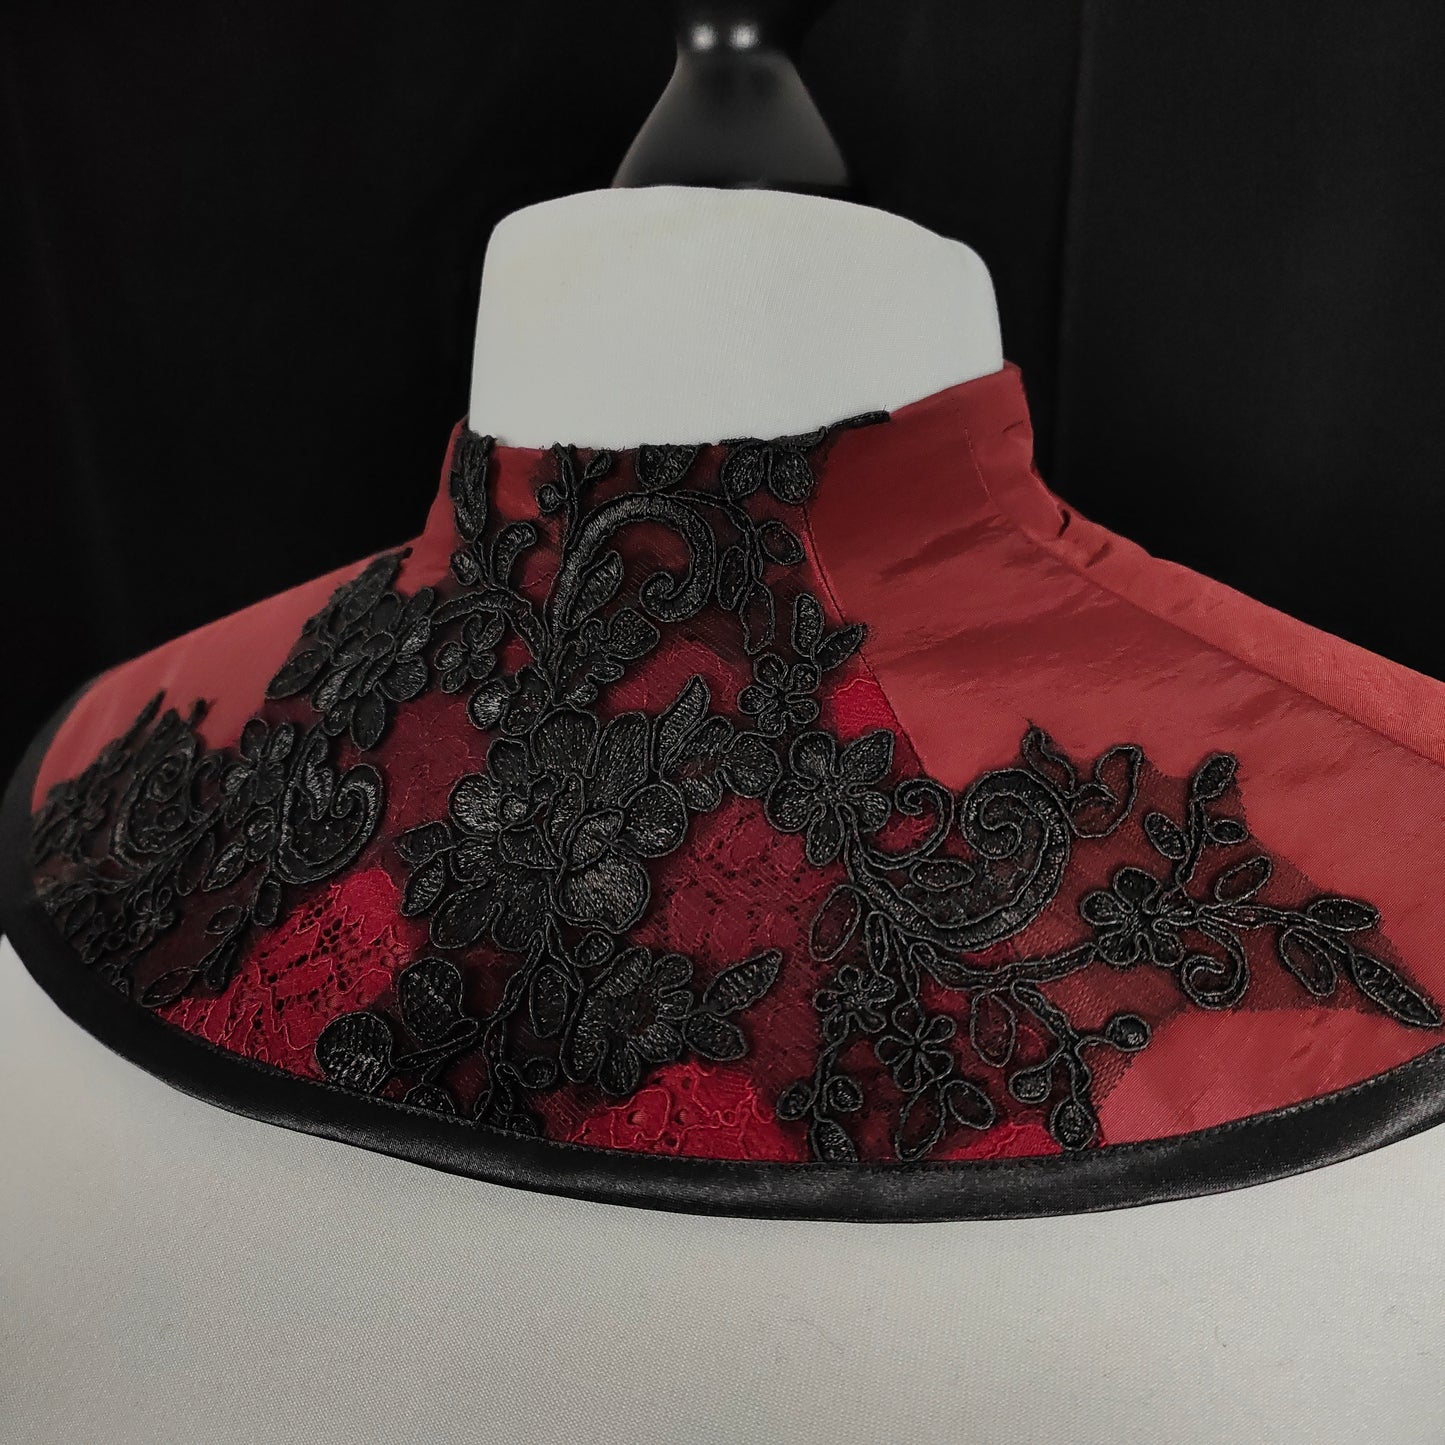 "Bloodmoon" collar (F/W 2023) unique one size